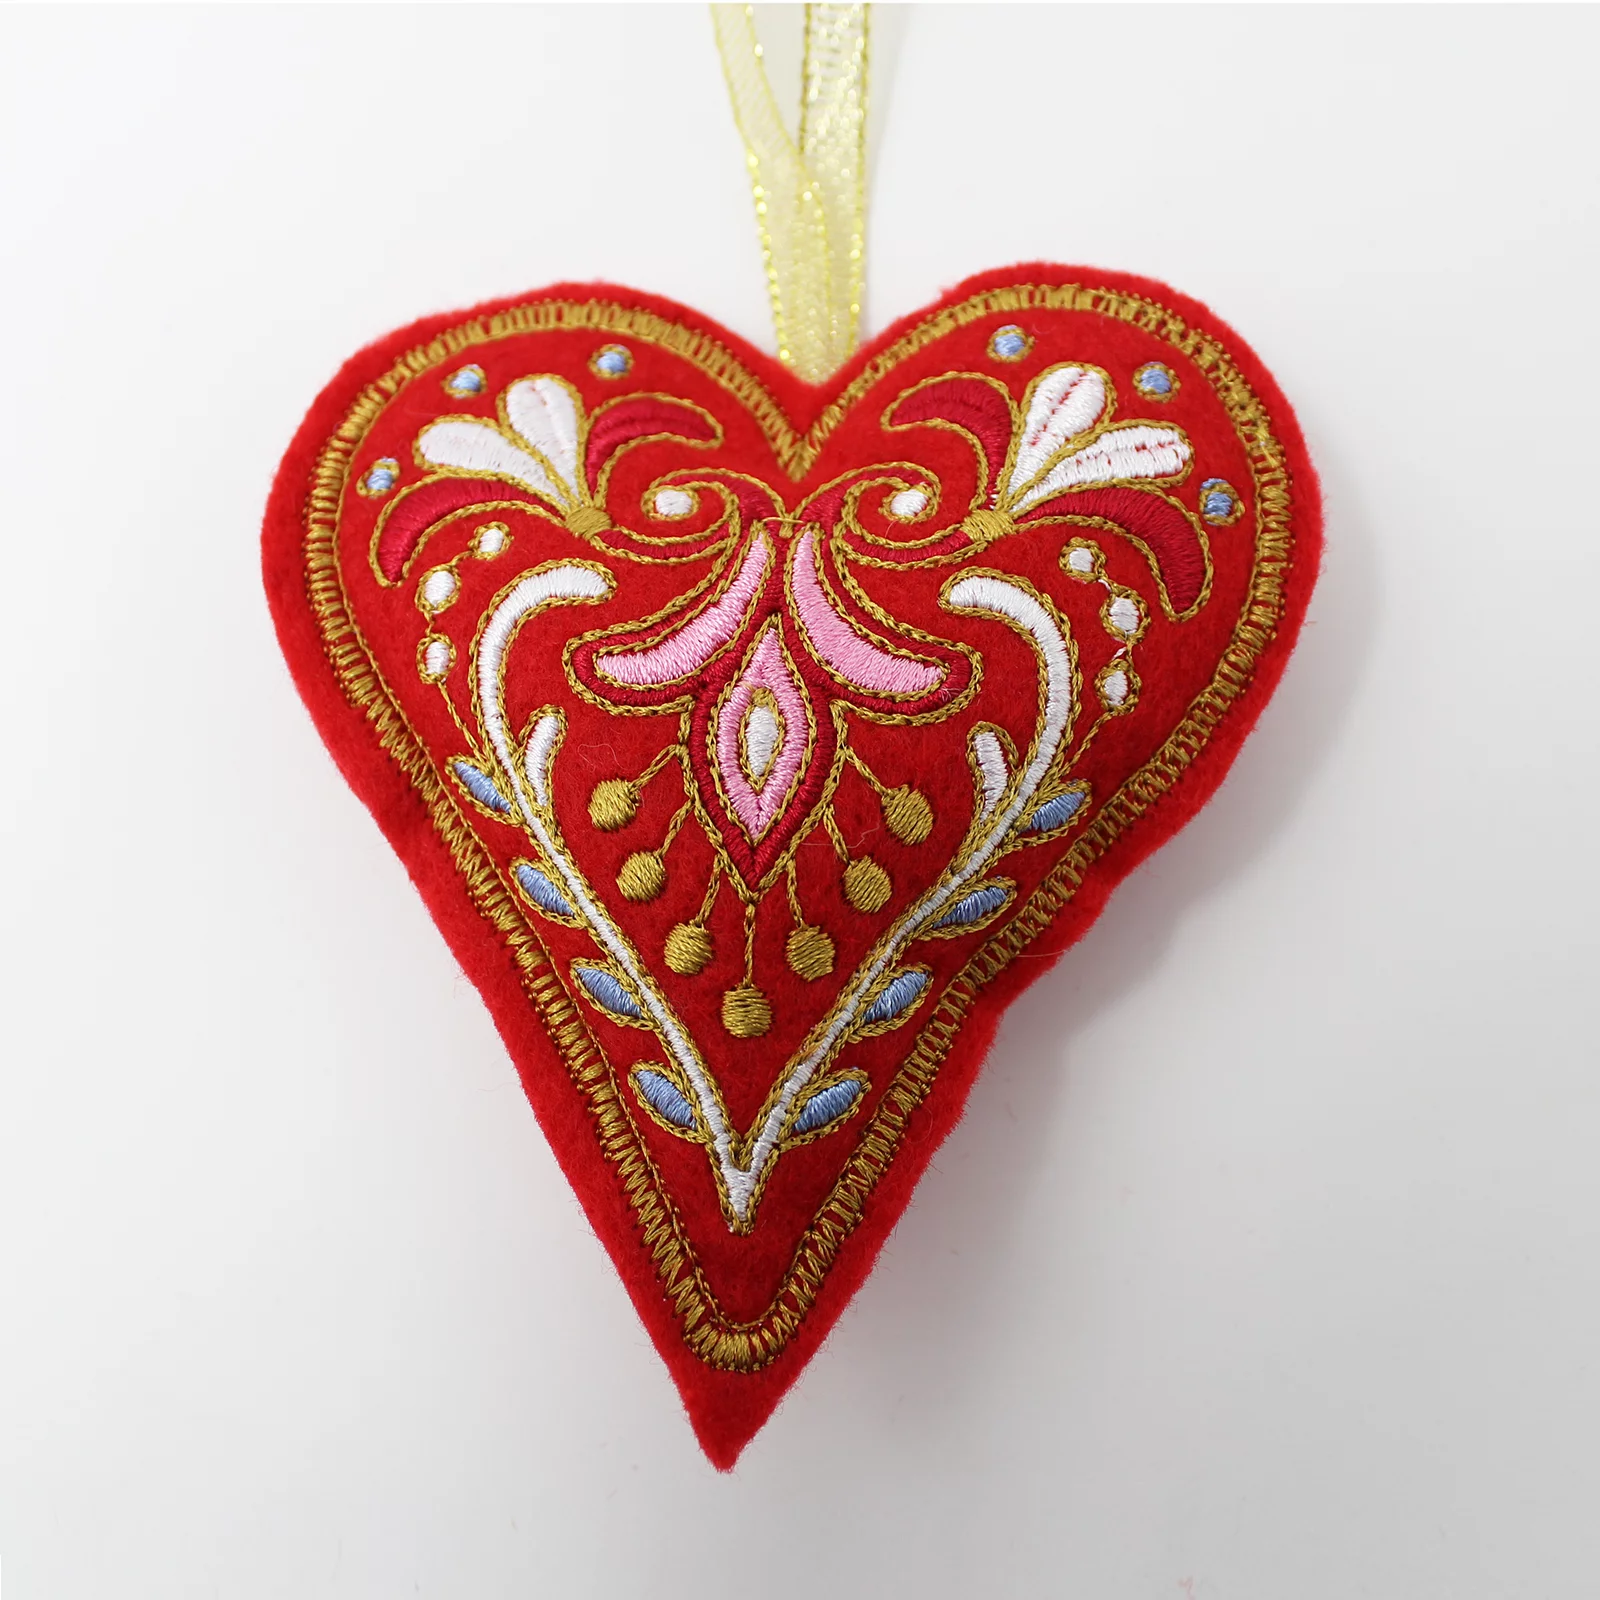 Embroidered Felt Heart Christmas Tree Decoration - Red